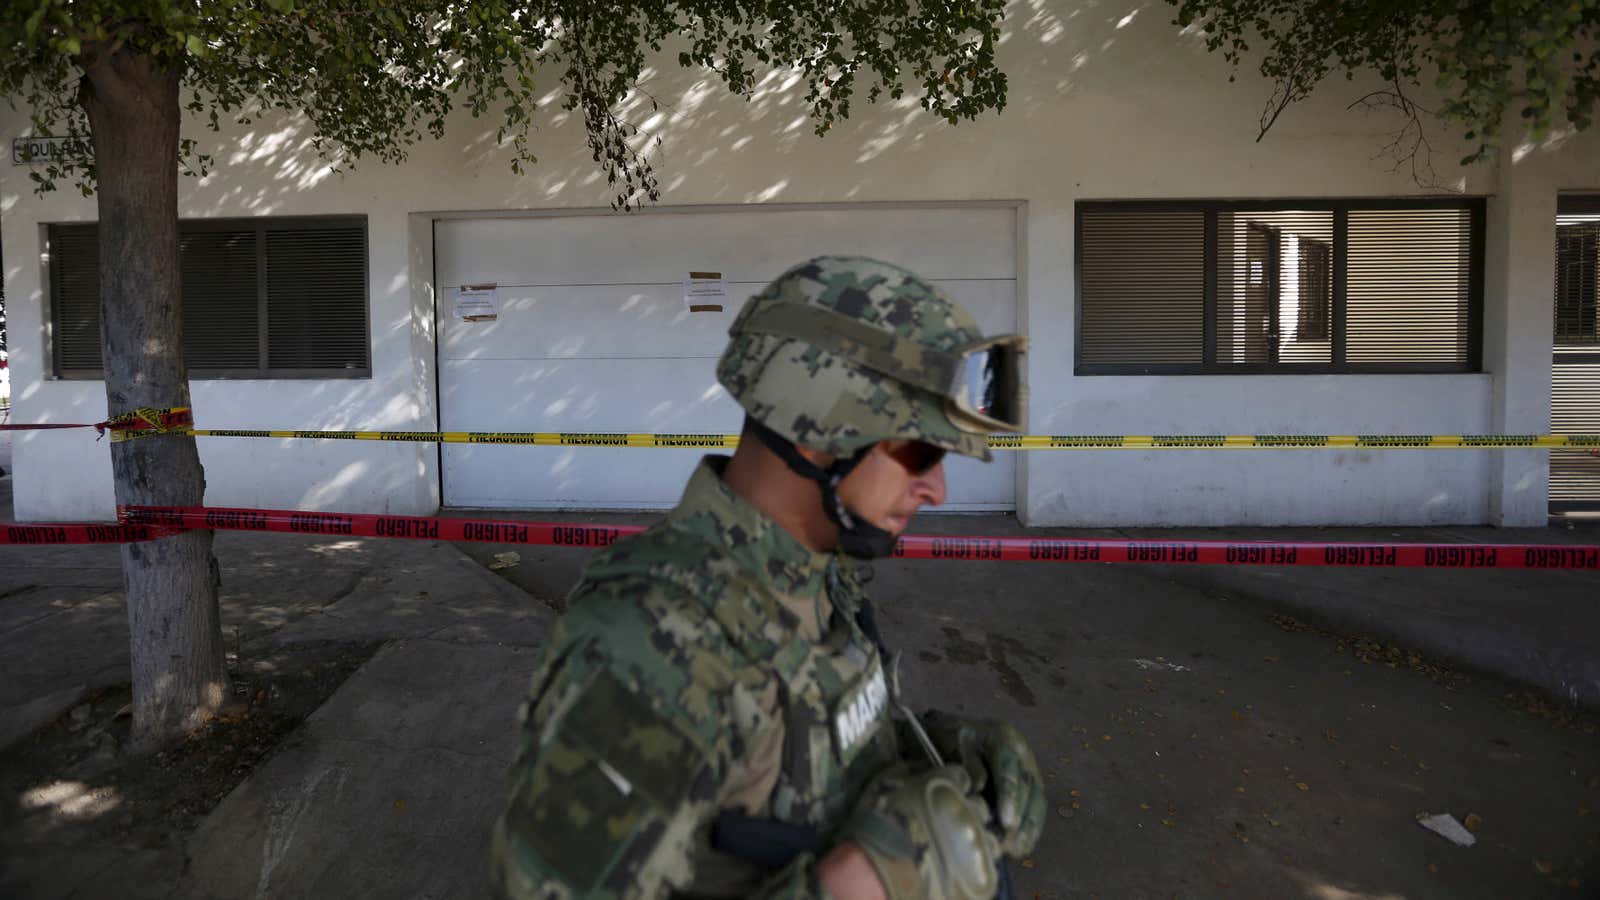 A soldier keeps watch outside the house where five people were shot dead during an operation to recapture the world’s top drug lord Joaquin “El Chapo” Guzman earlier this month.